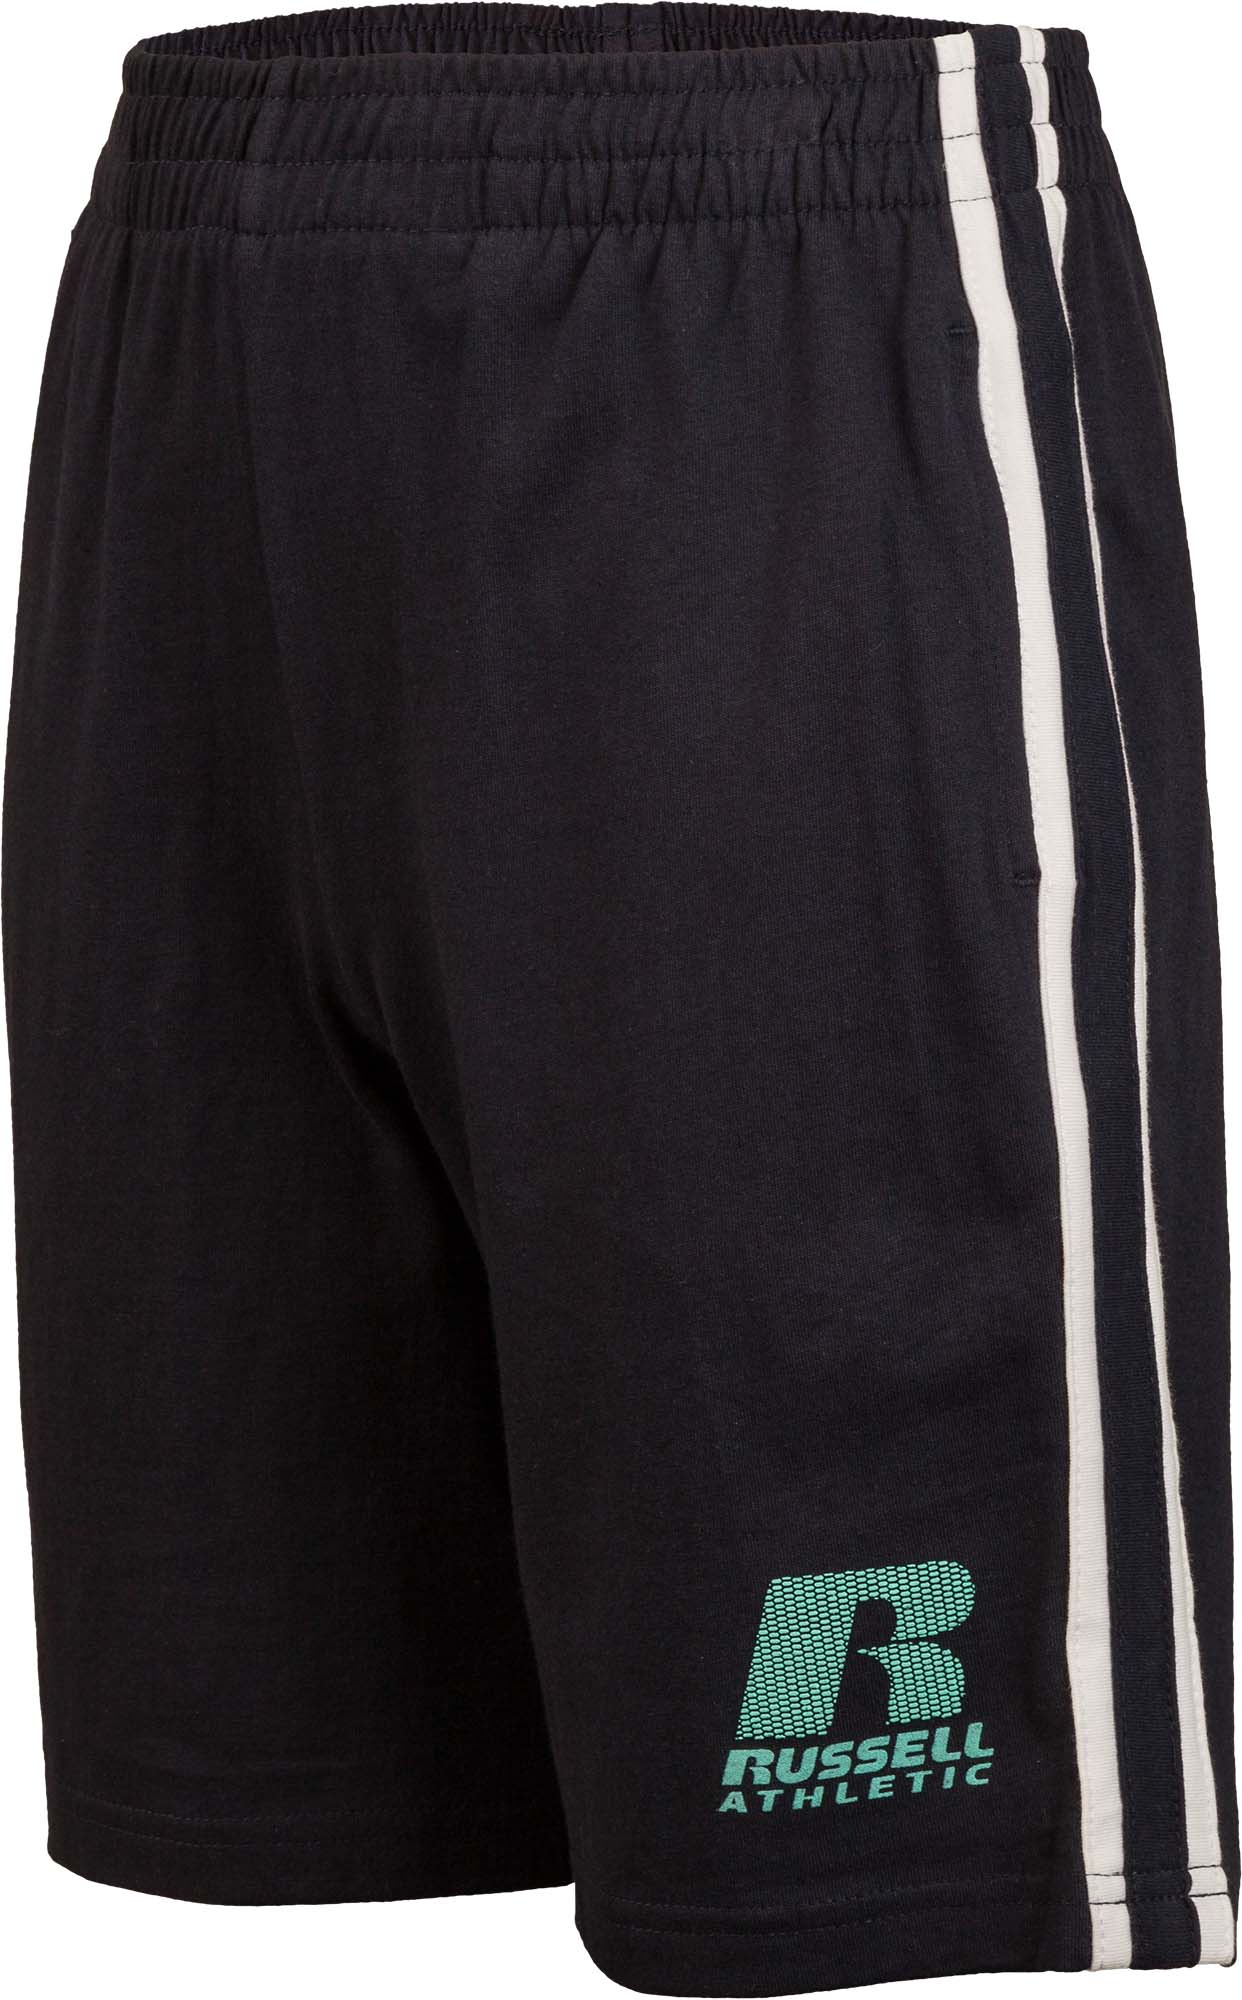 Children's Shorts - Russell Athletic